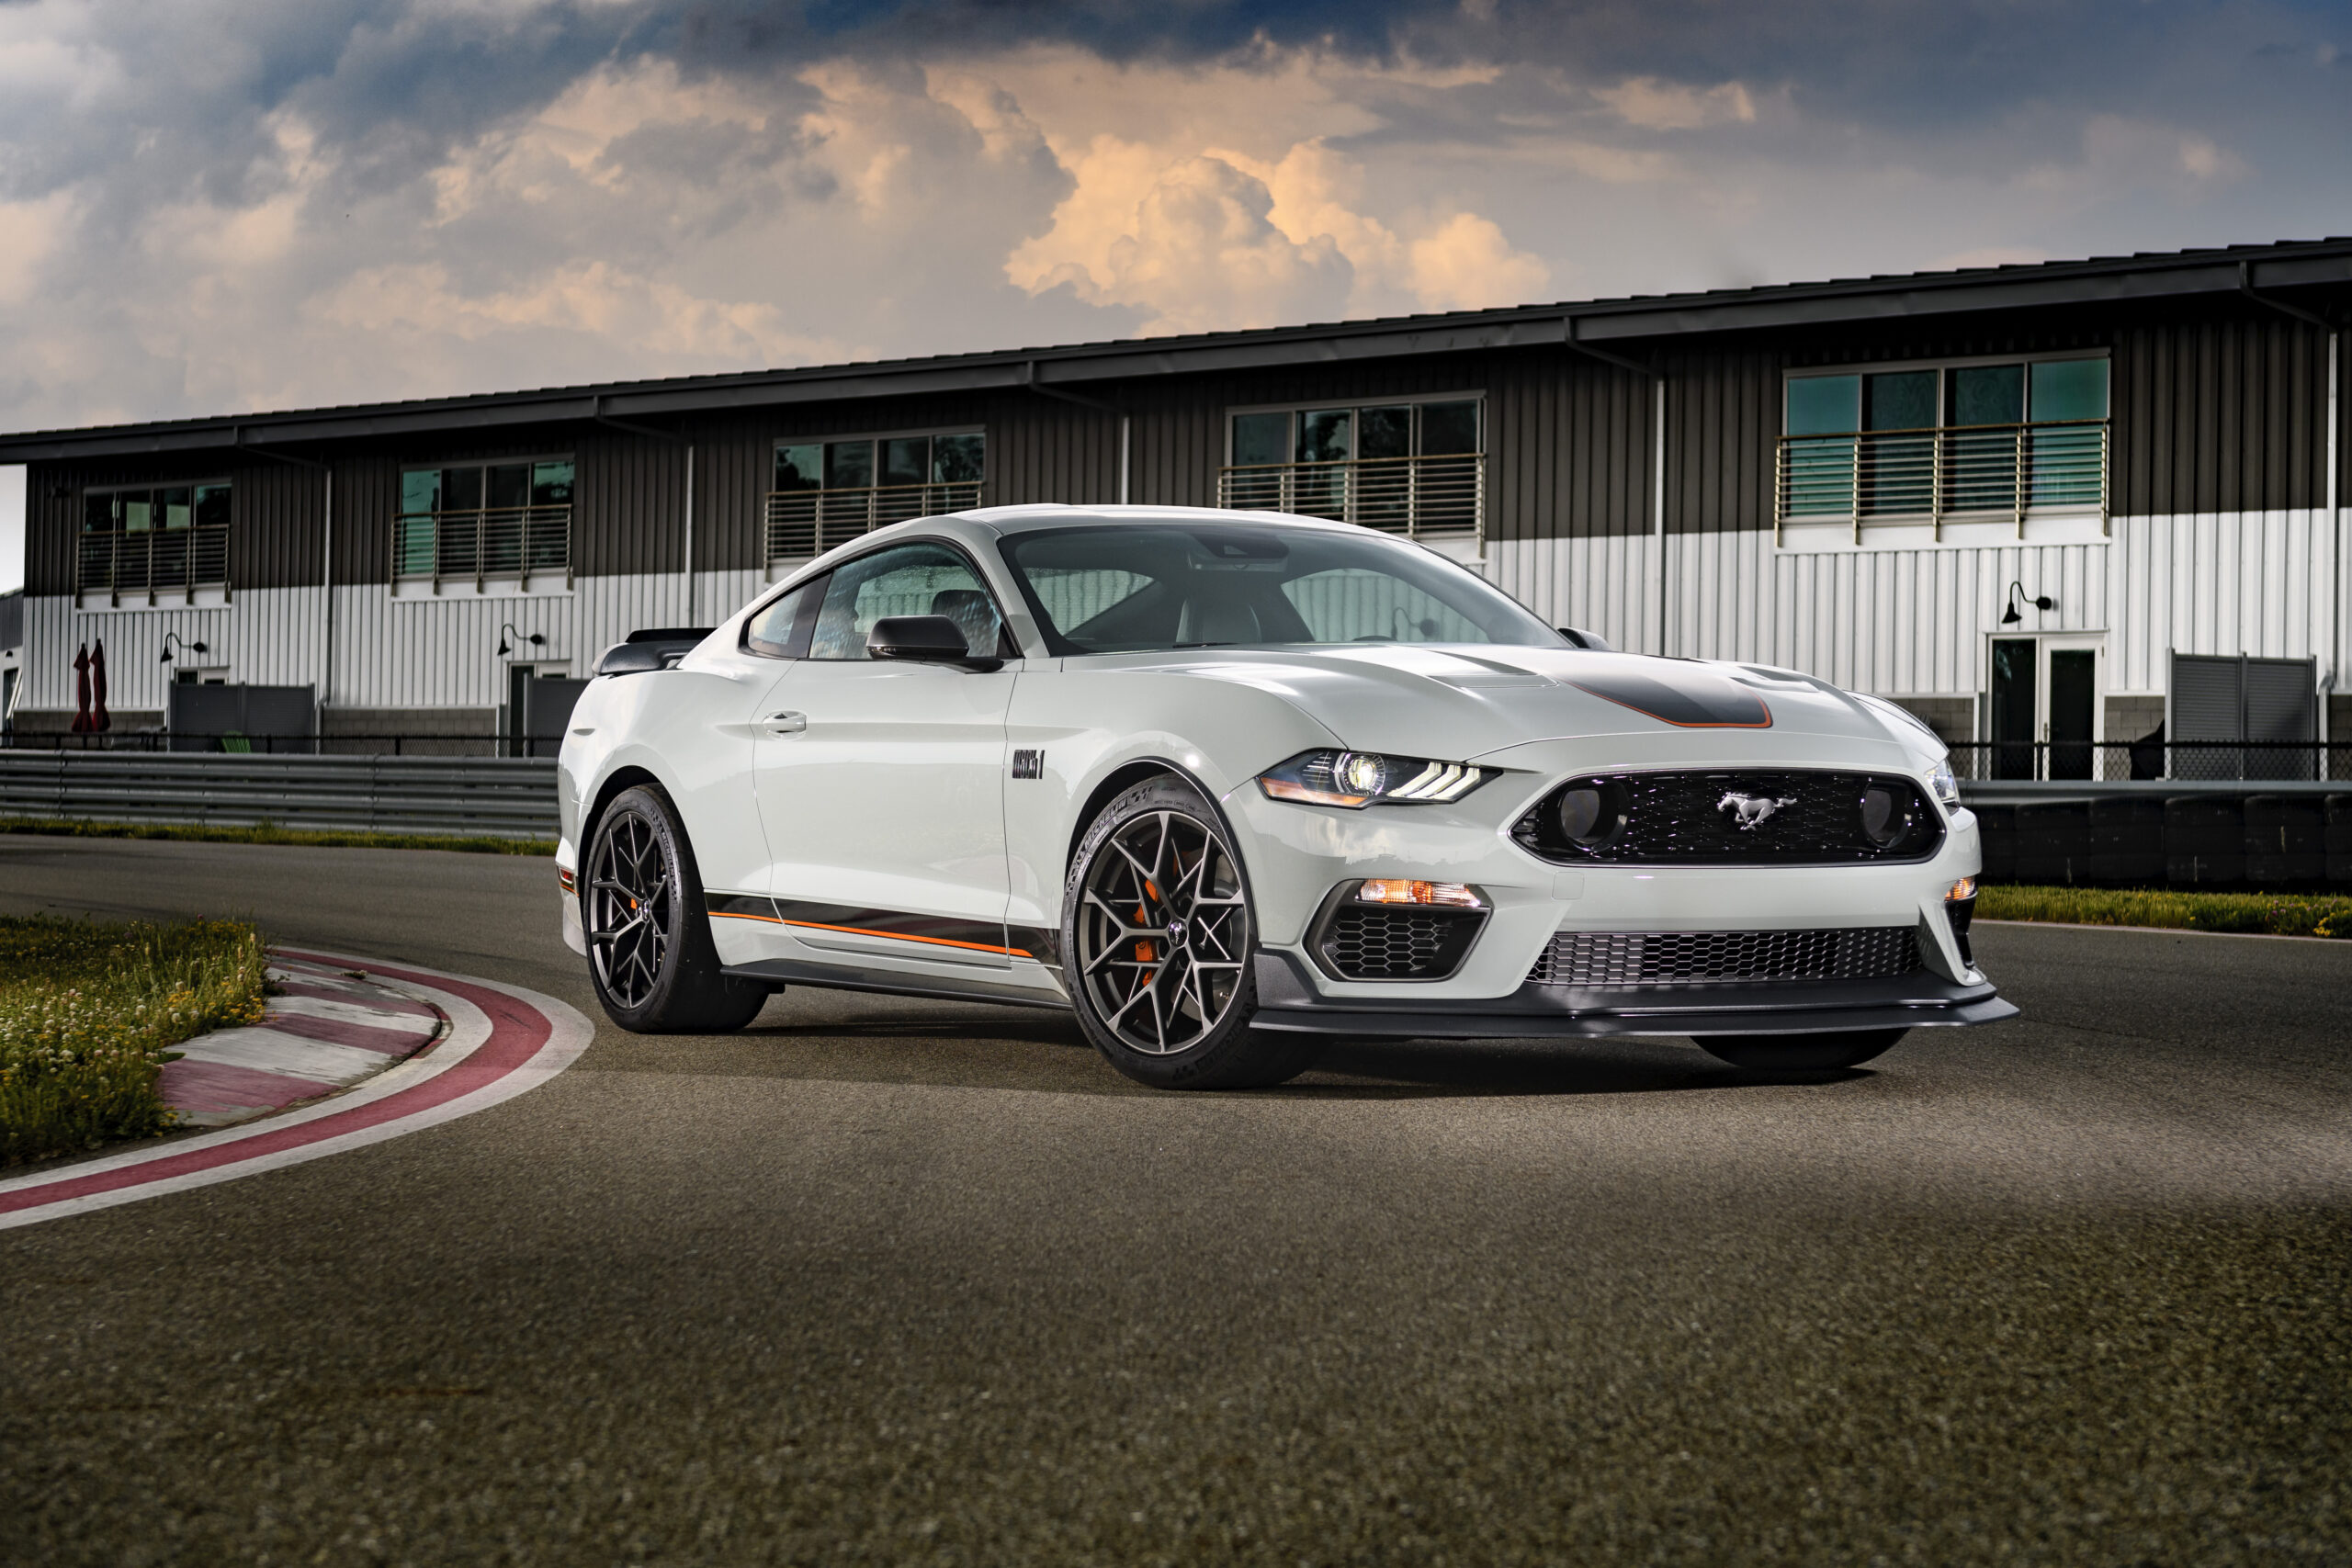 Mach 1 Mustang Adopts GT350 Tremec, Available Spring 2021